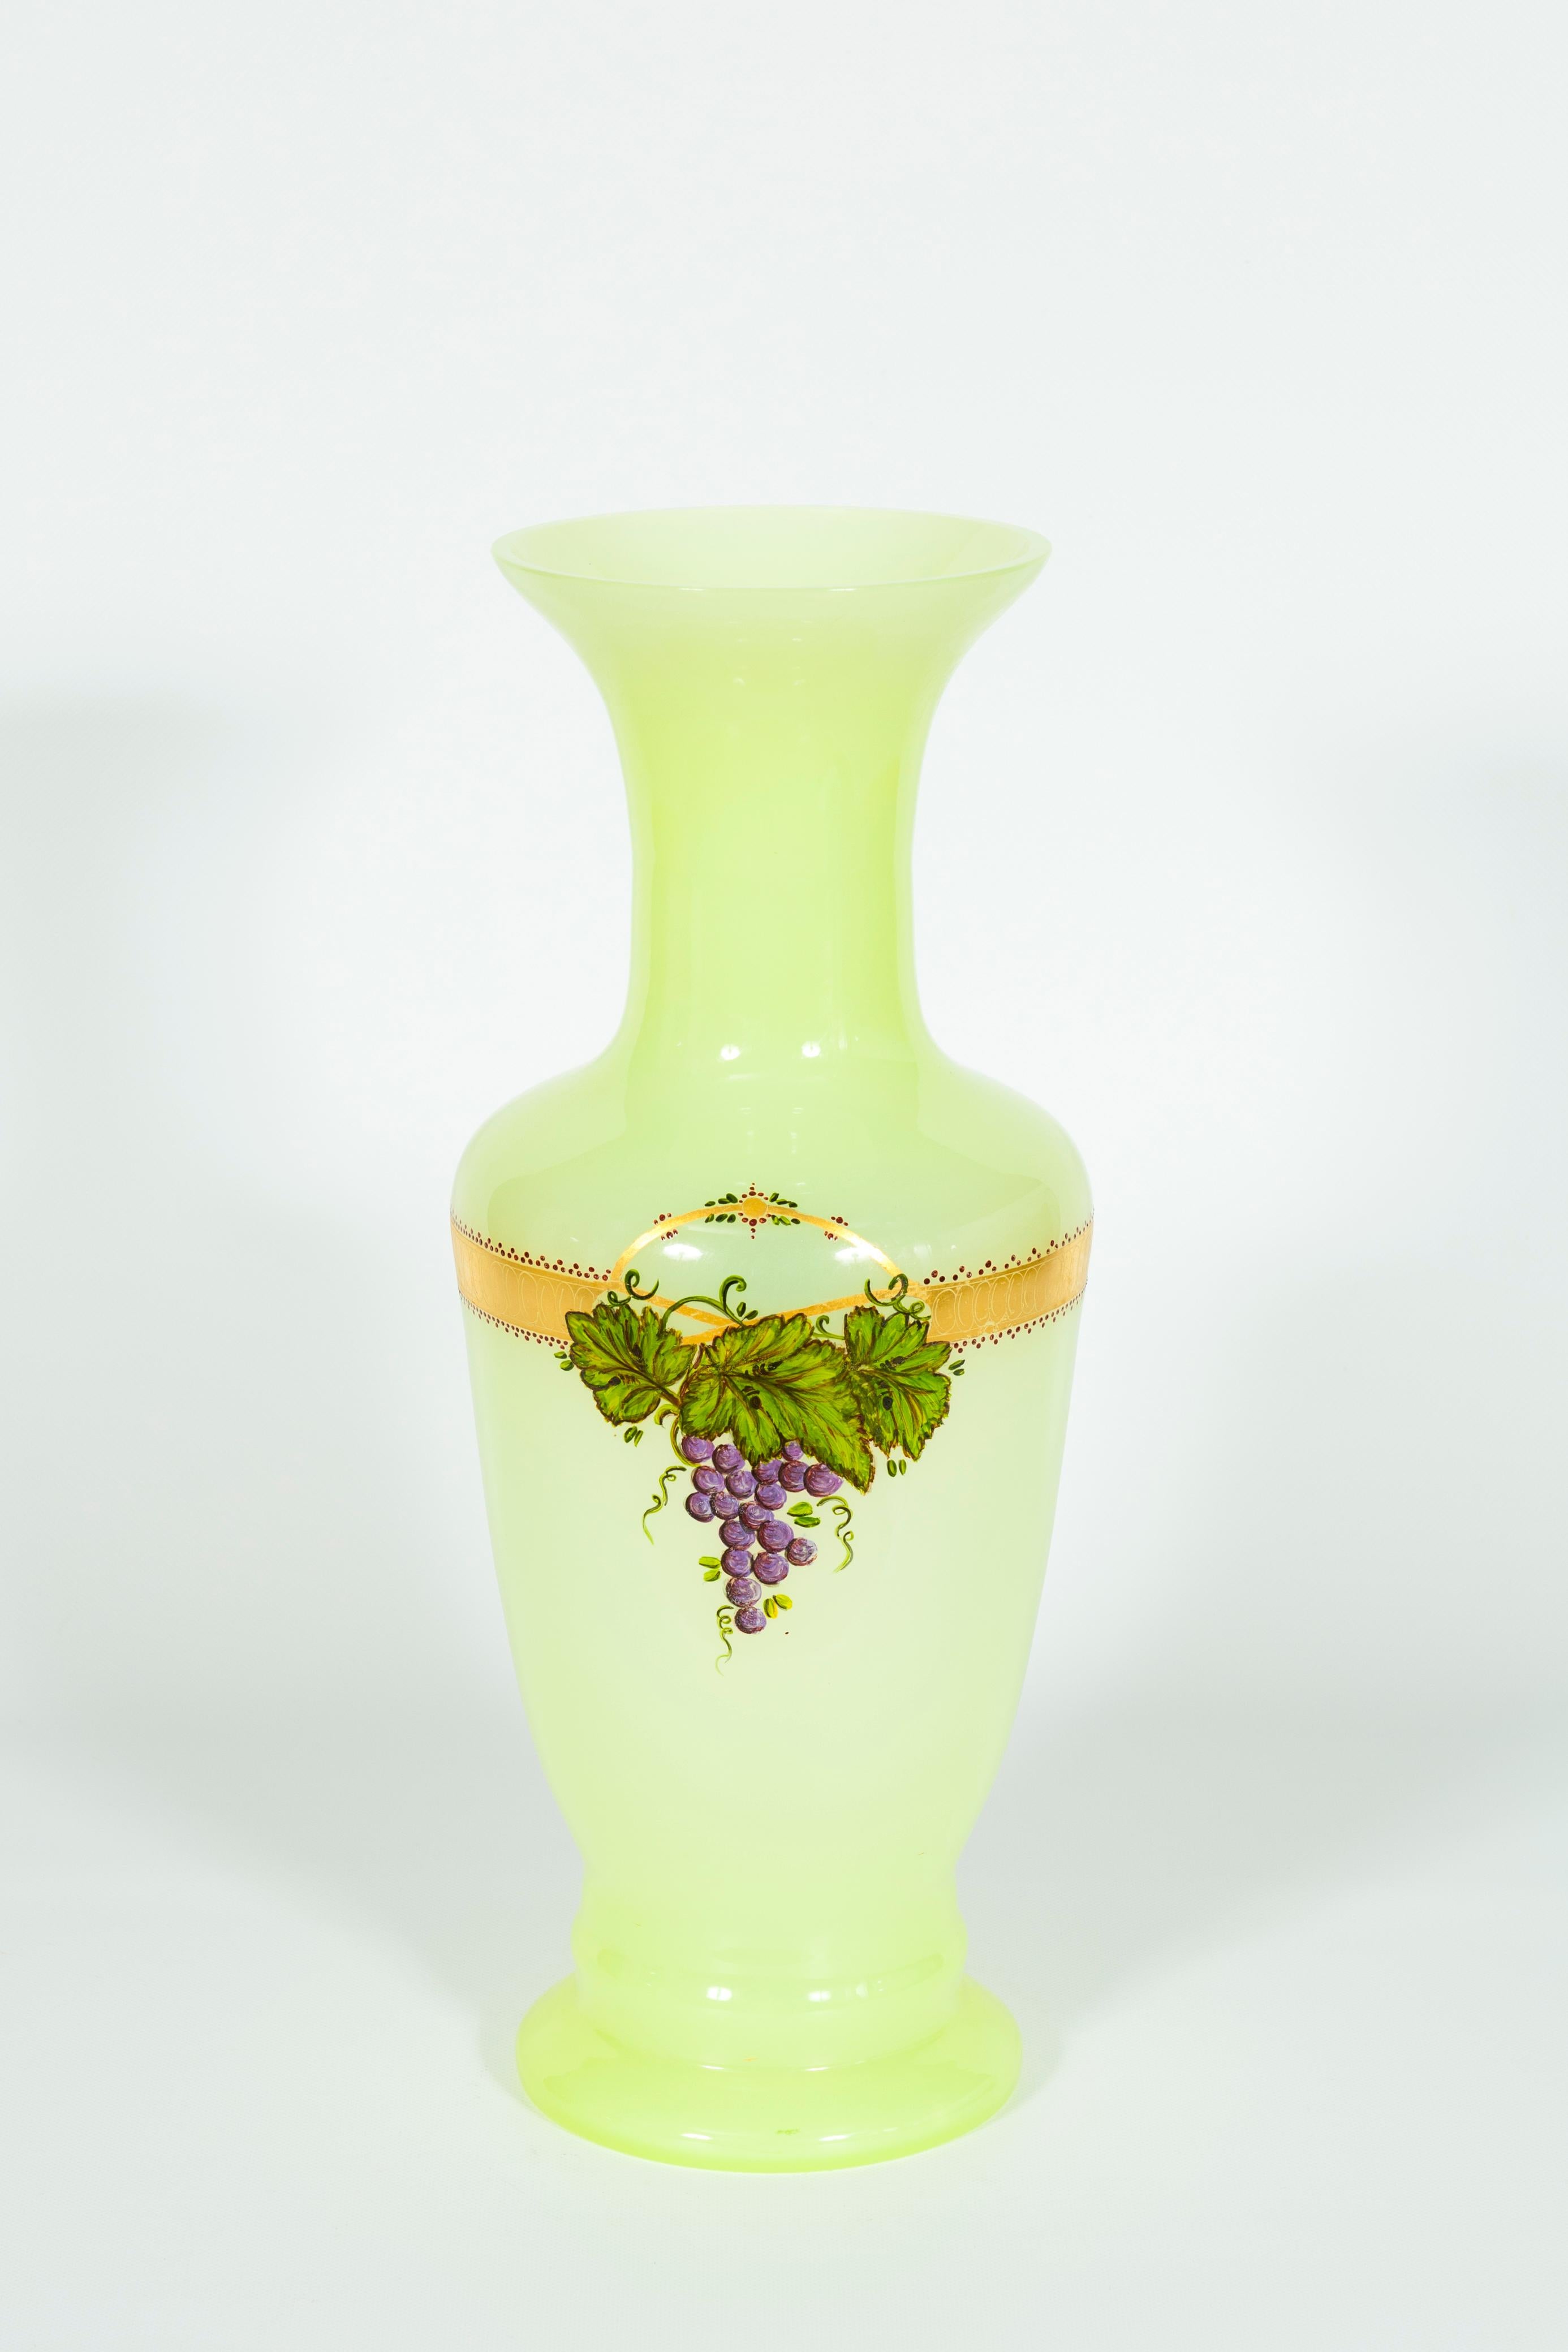 Pair of Fluorescent Yellow Murano Glass Vases Hand Painted and Decorated 1990s For Sale 5